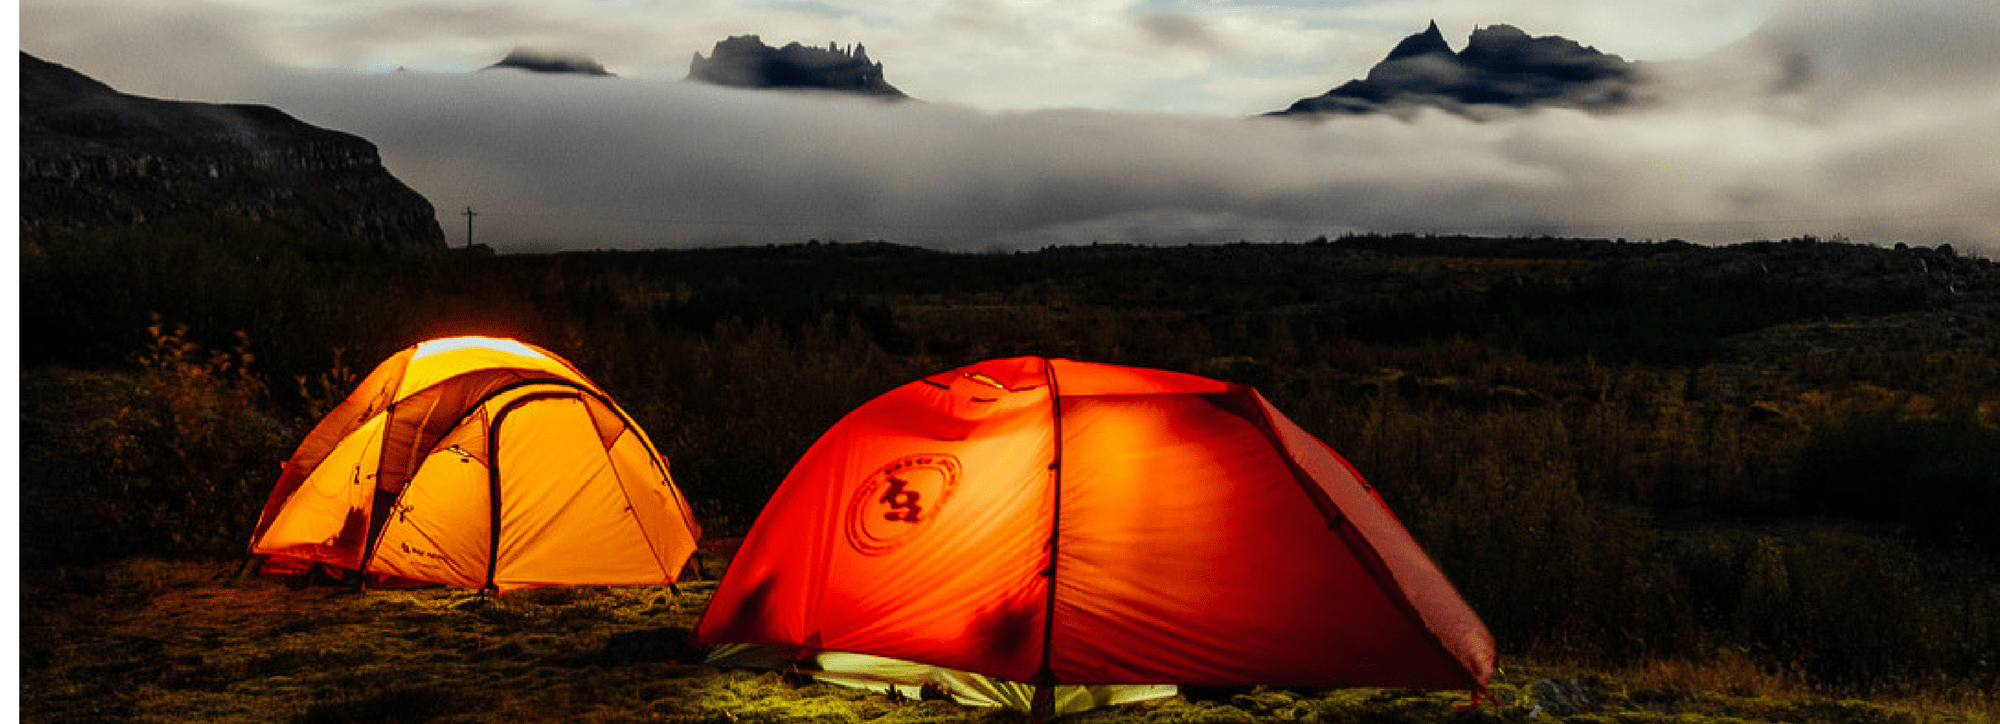 https://buymeonce.com/cdn/shop/articles/camping-gear-that-leaves-no-trace-buymeonce_11_-min_2000x.png?v=1521200340